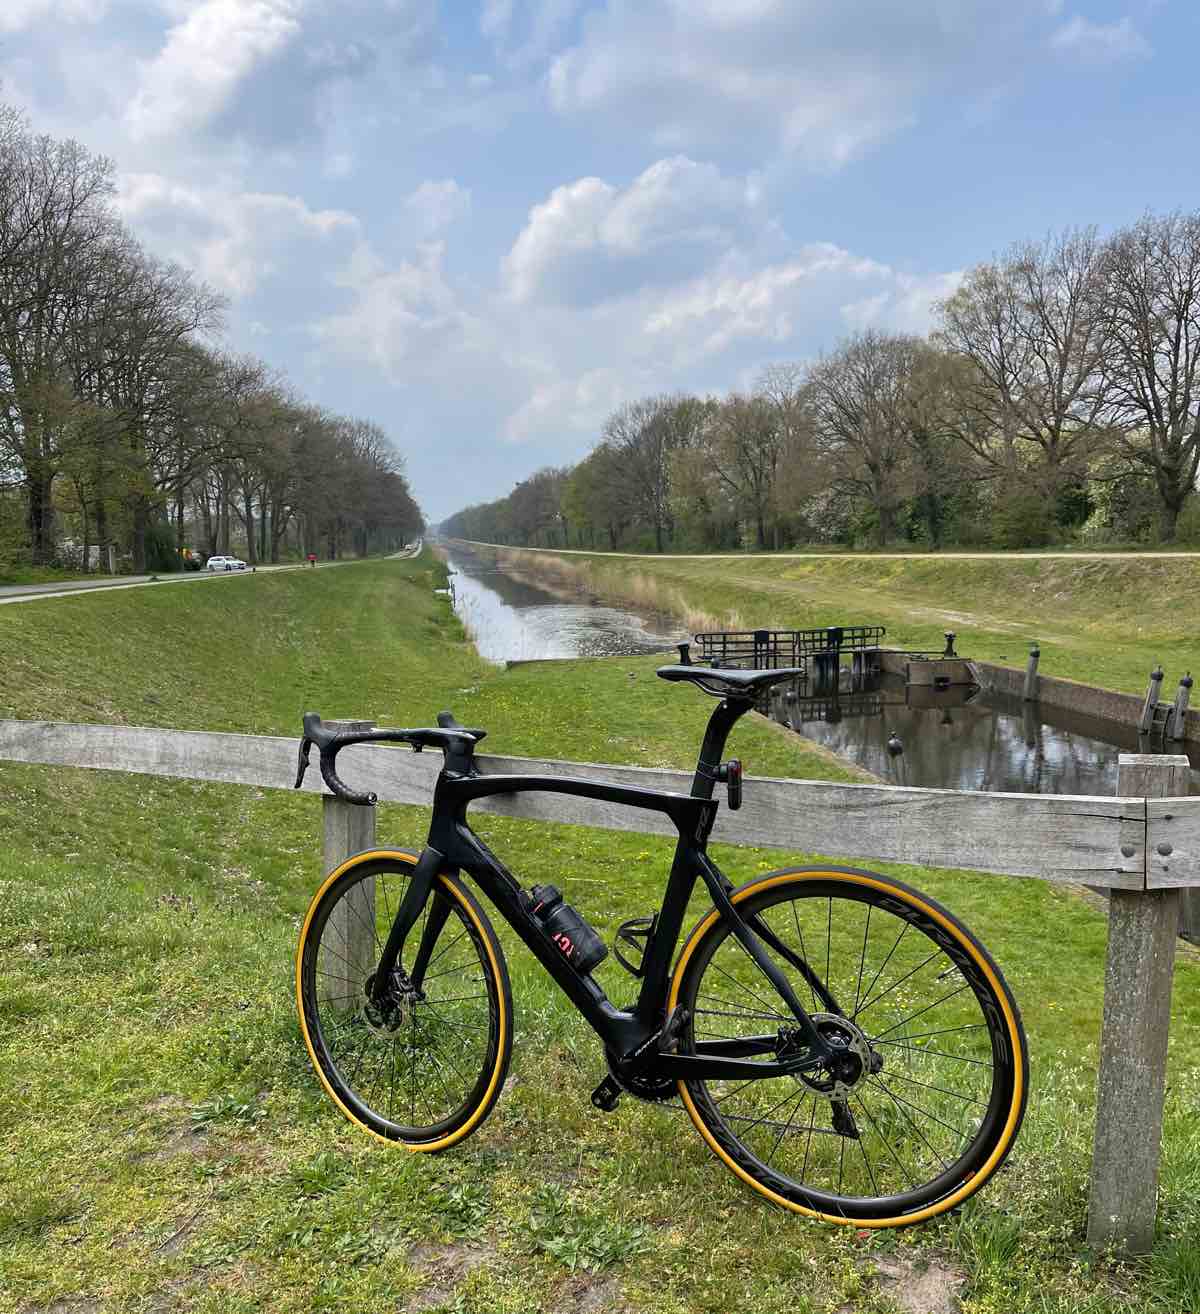 bikerumor pic of the day a road bicycle leans against a wooden fence near a cycle path that follows a canal there are trees bordering the sites of the canal.